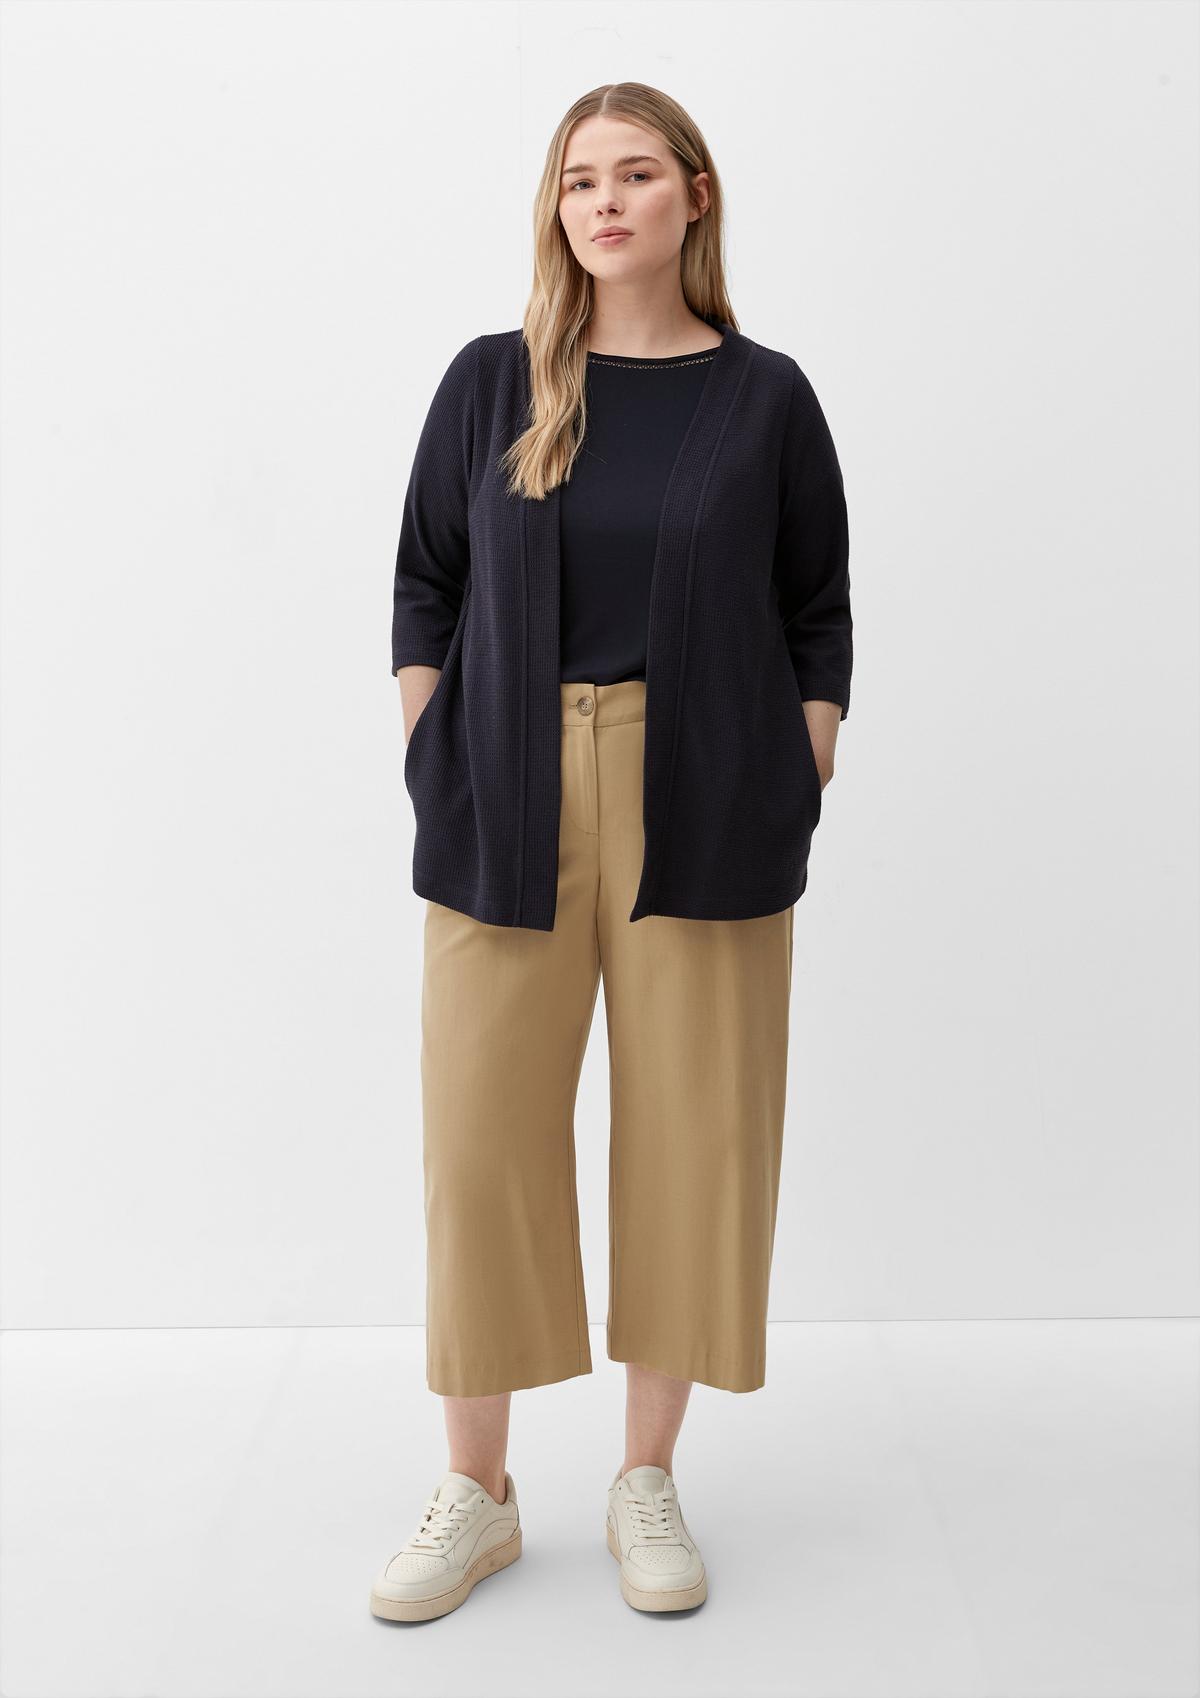 Culottes with an elasticated waistband